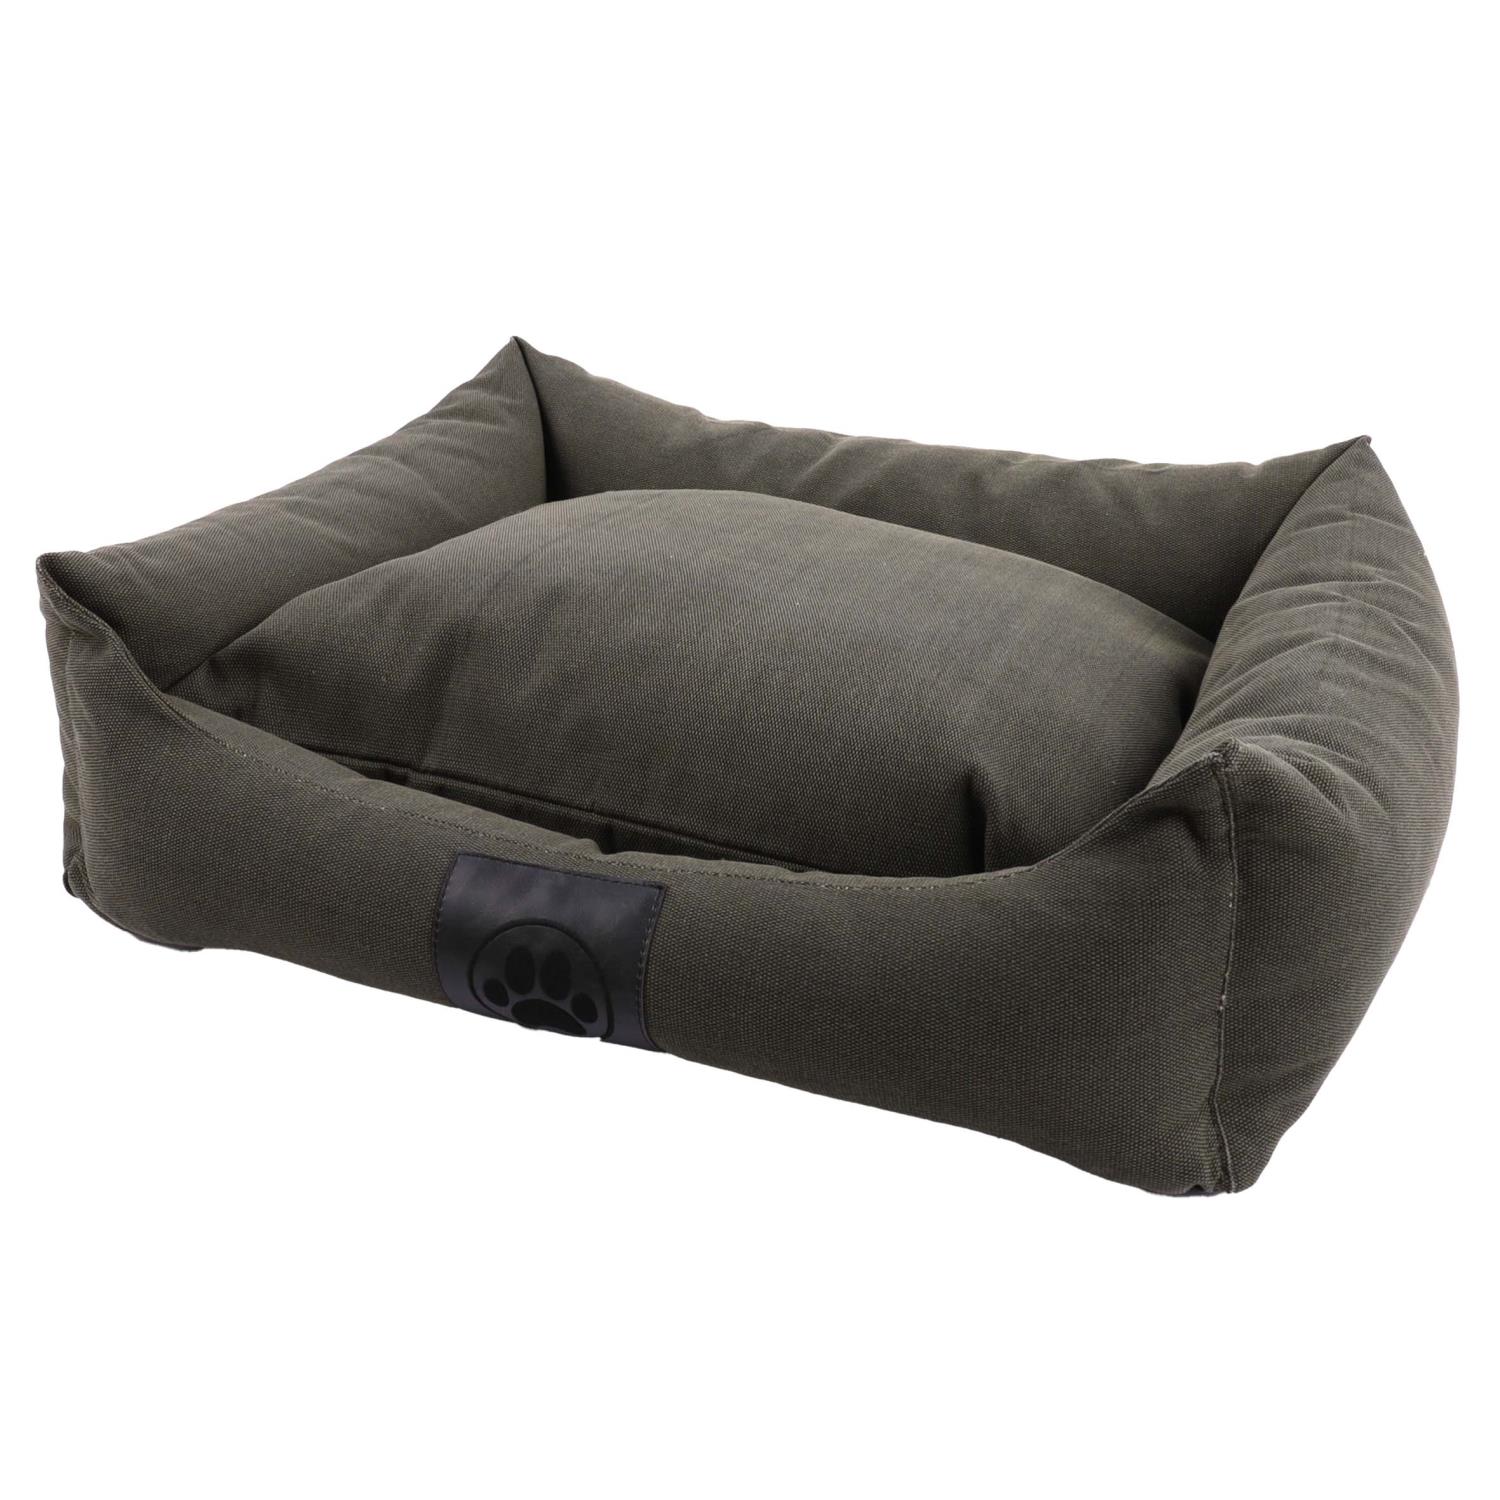 OS Dog Cocoon Canvas Revers Pillow.90/70/22 55-Olive